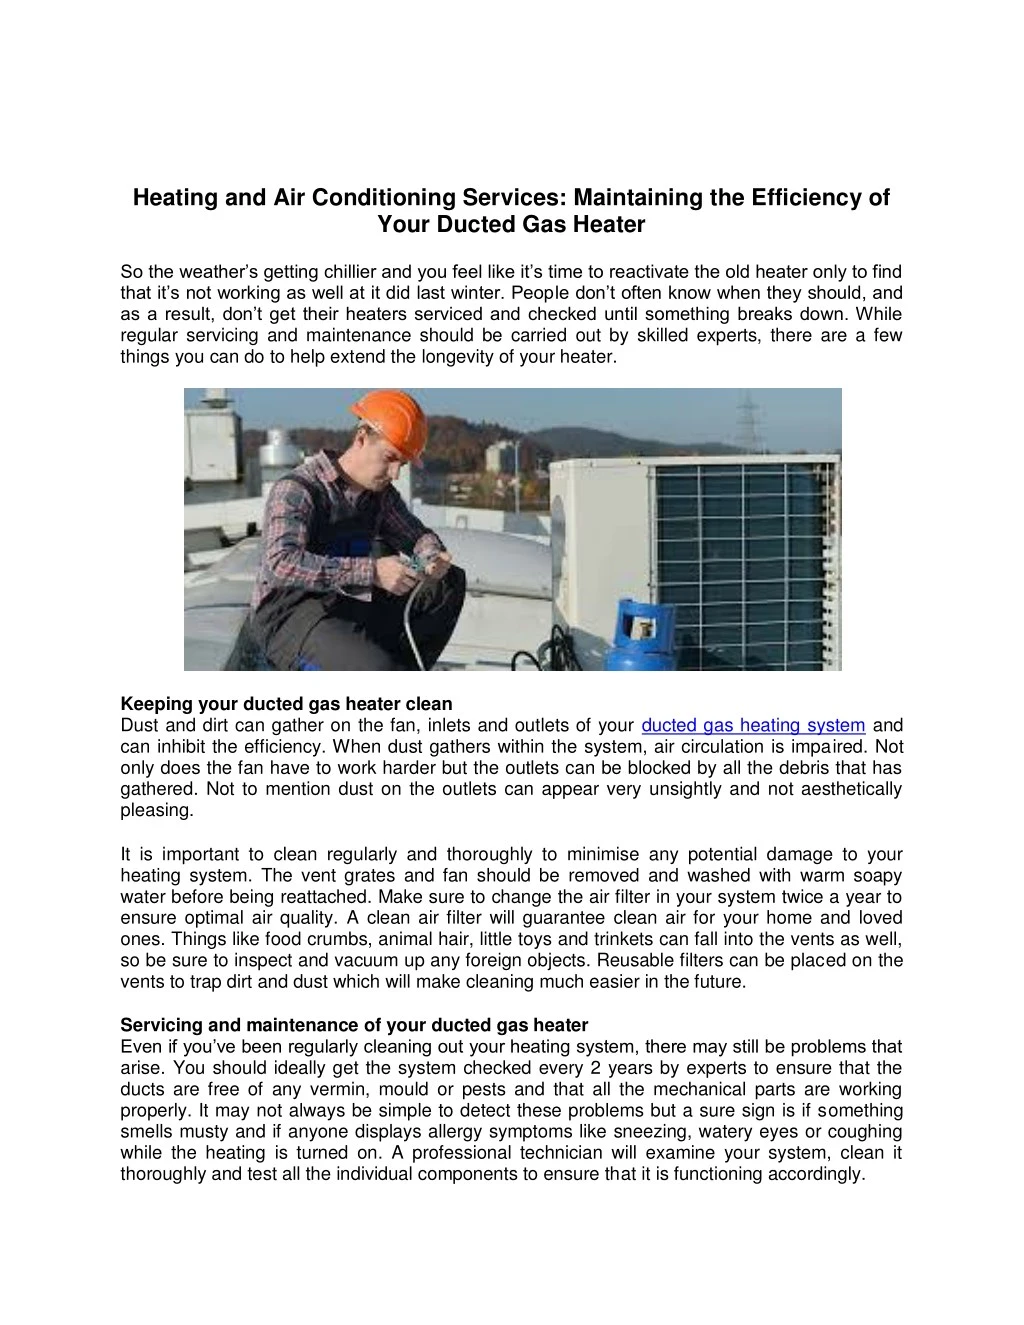 heating and air conditioning services maintaining n.